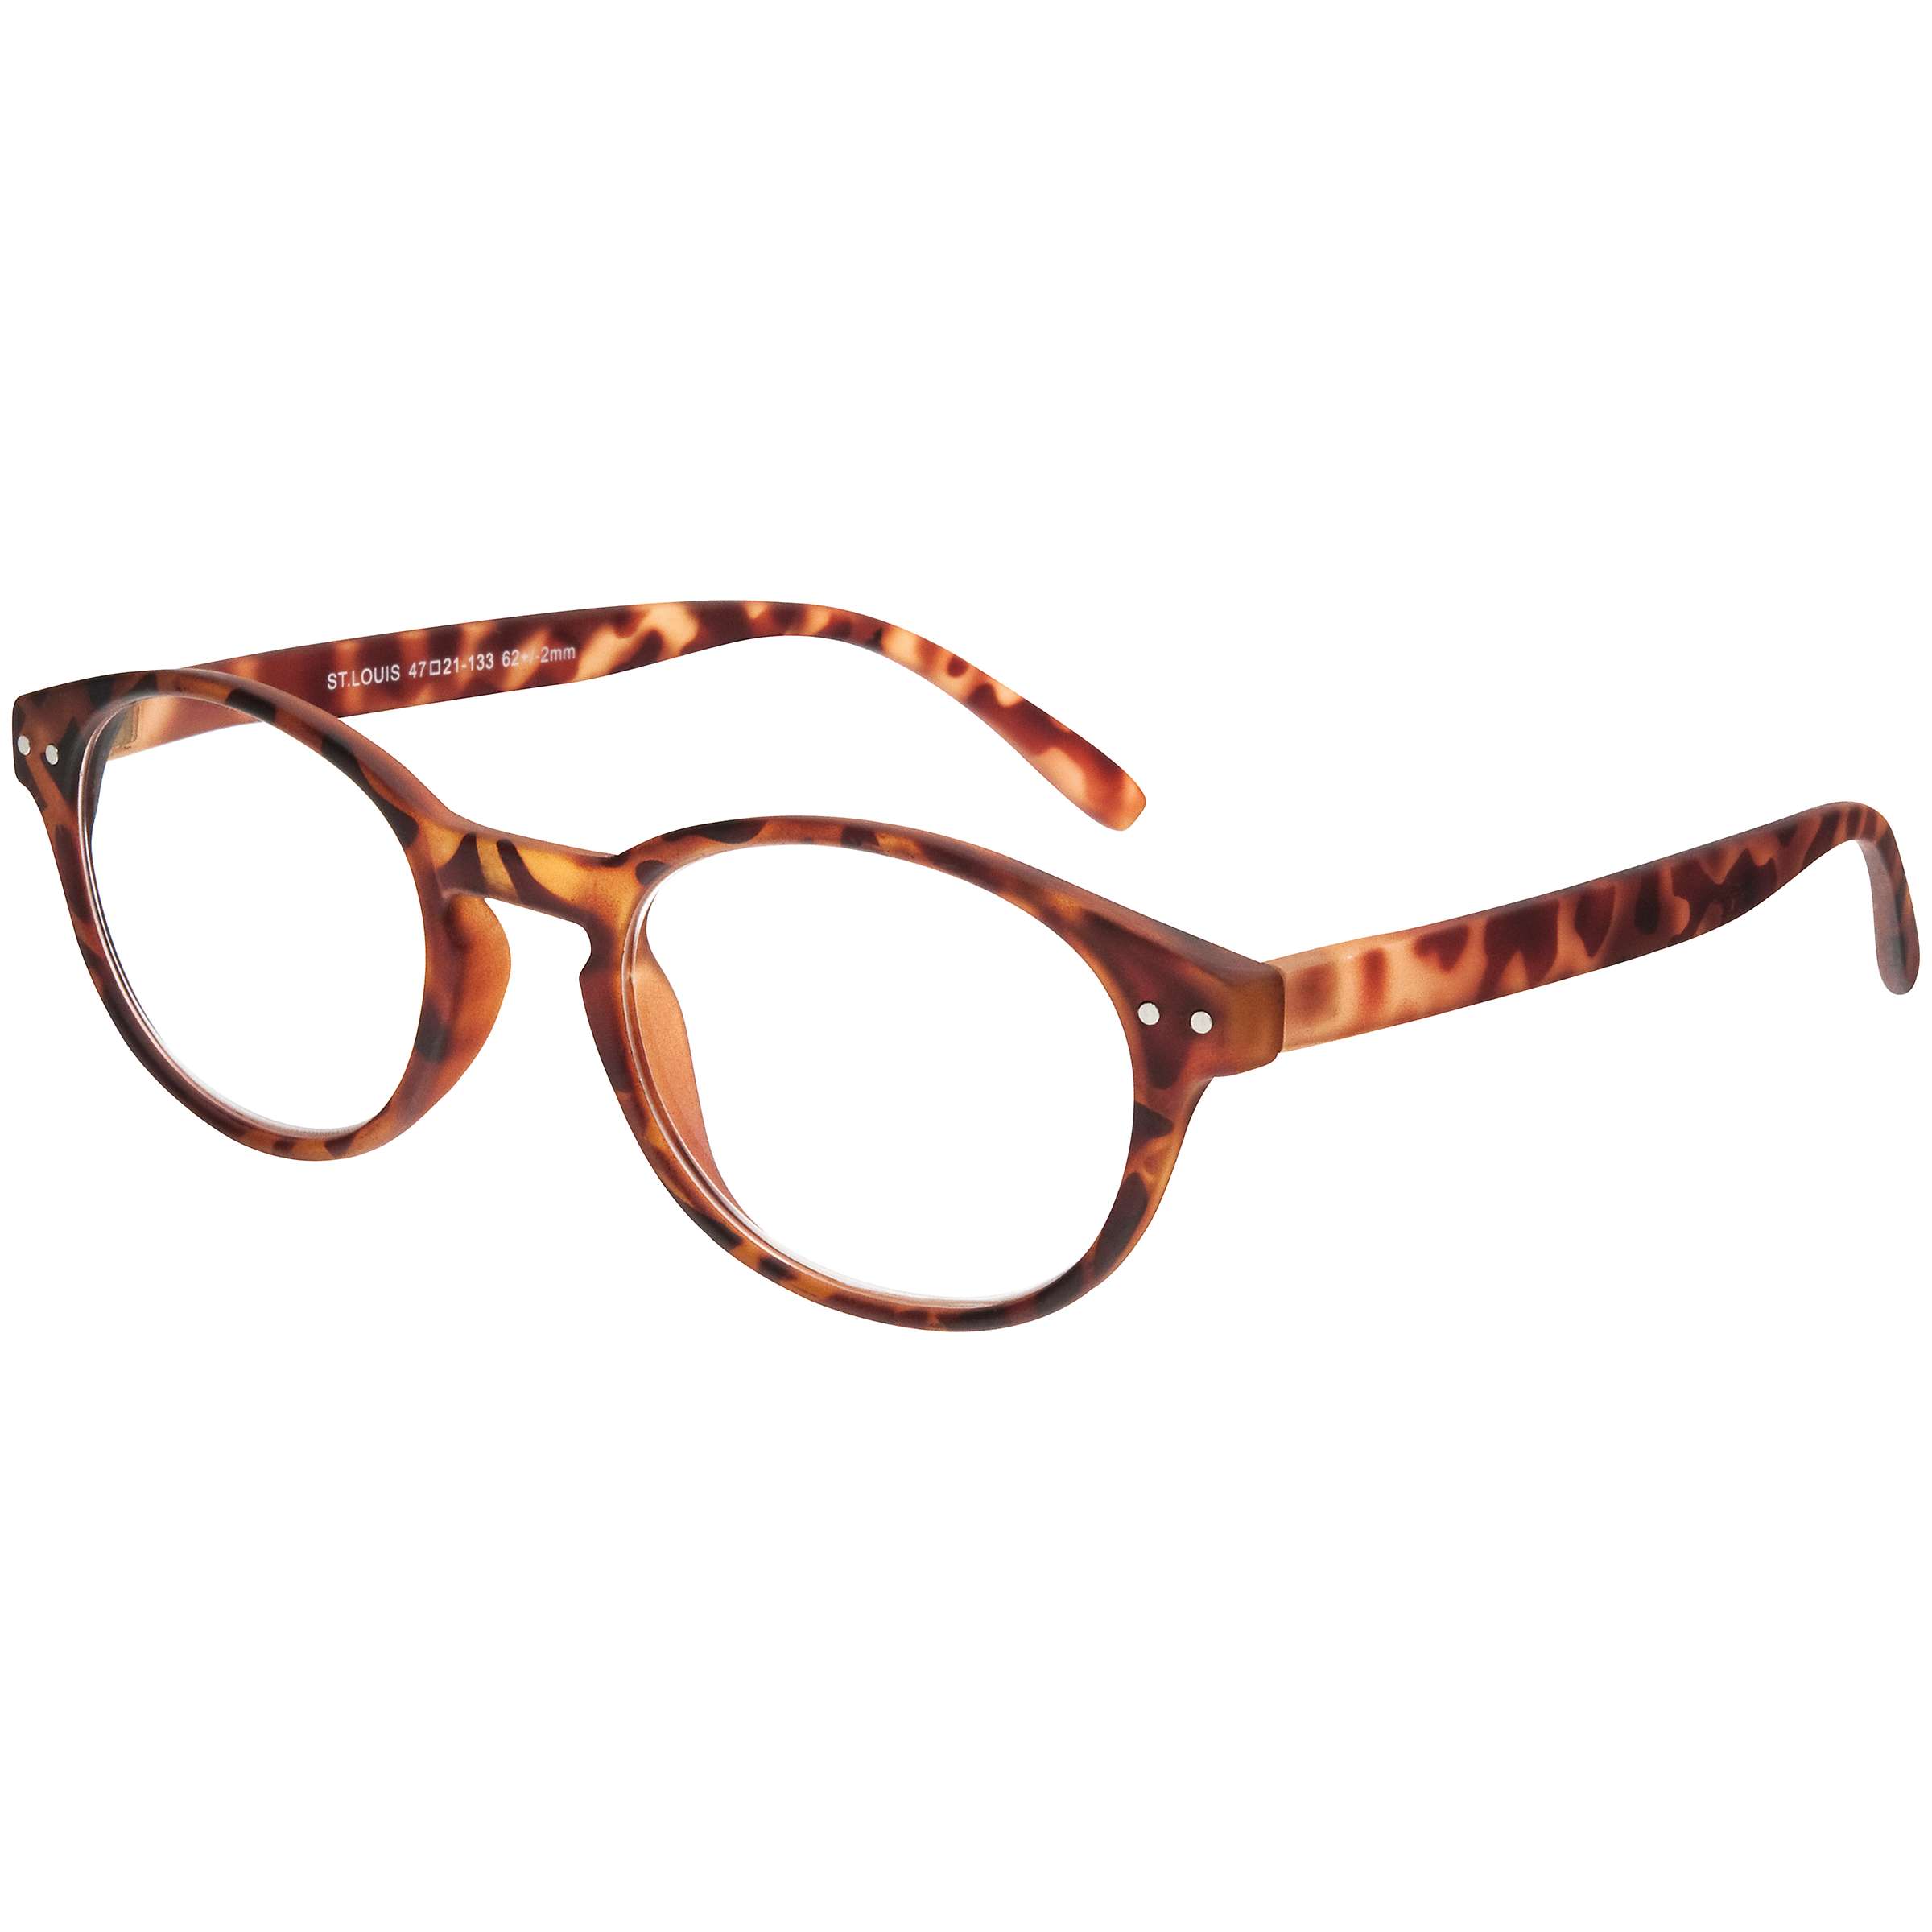 Buy Magnif Eyes Very Narrow Fit Ready Readers St Louis Glasses, Tortoise Online at johnlewis.com